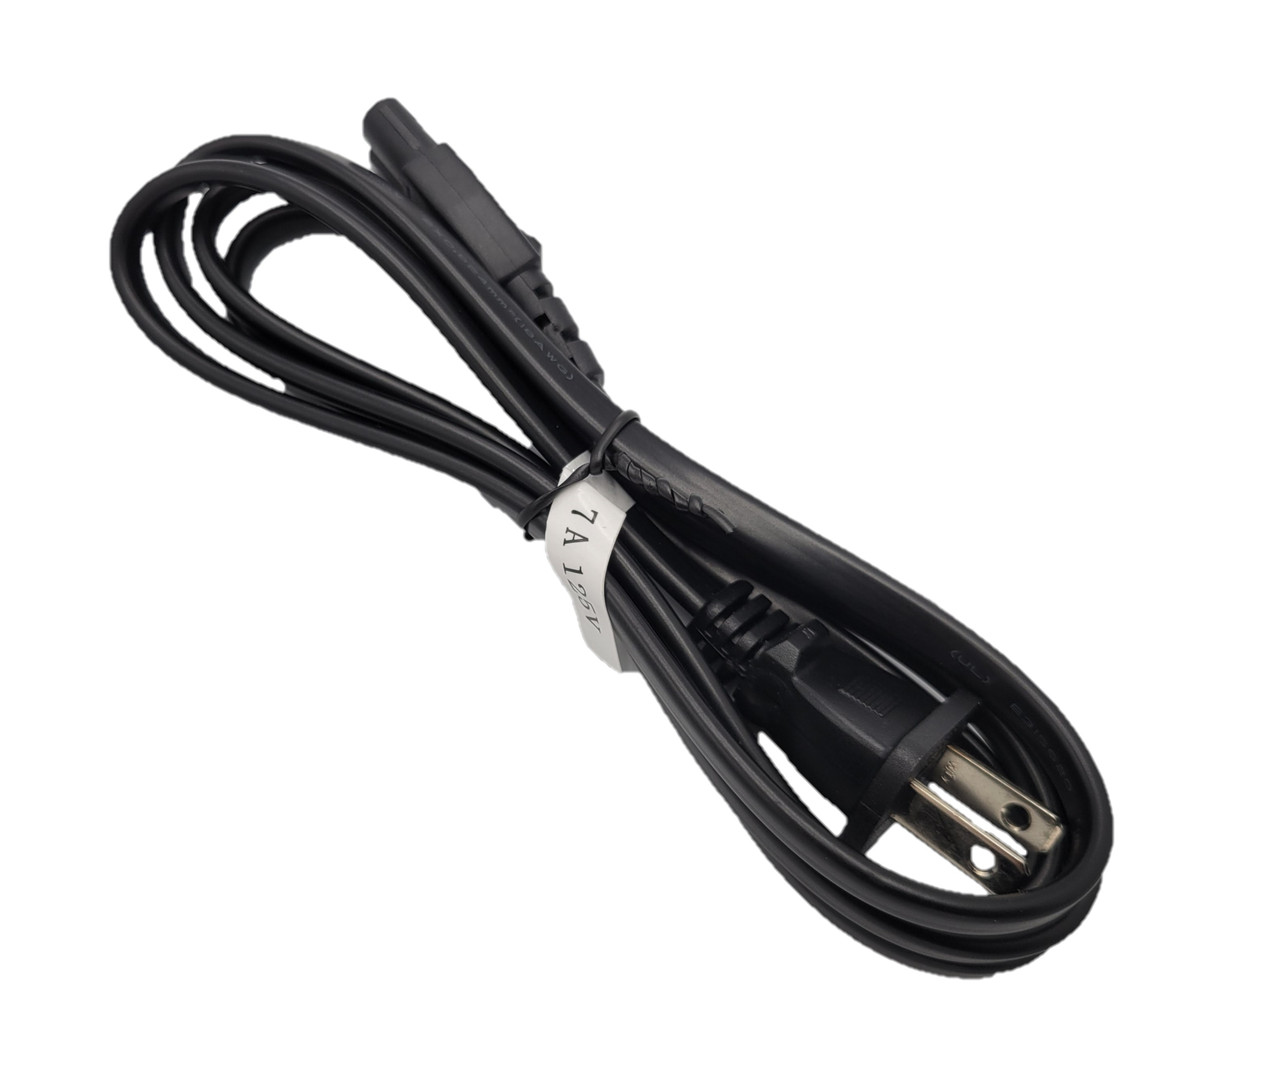 1.5 Meter Notebook AC Power Cord 2-Prong (18 AWG) Black - Micro Connectors,